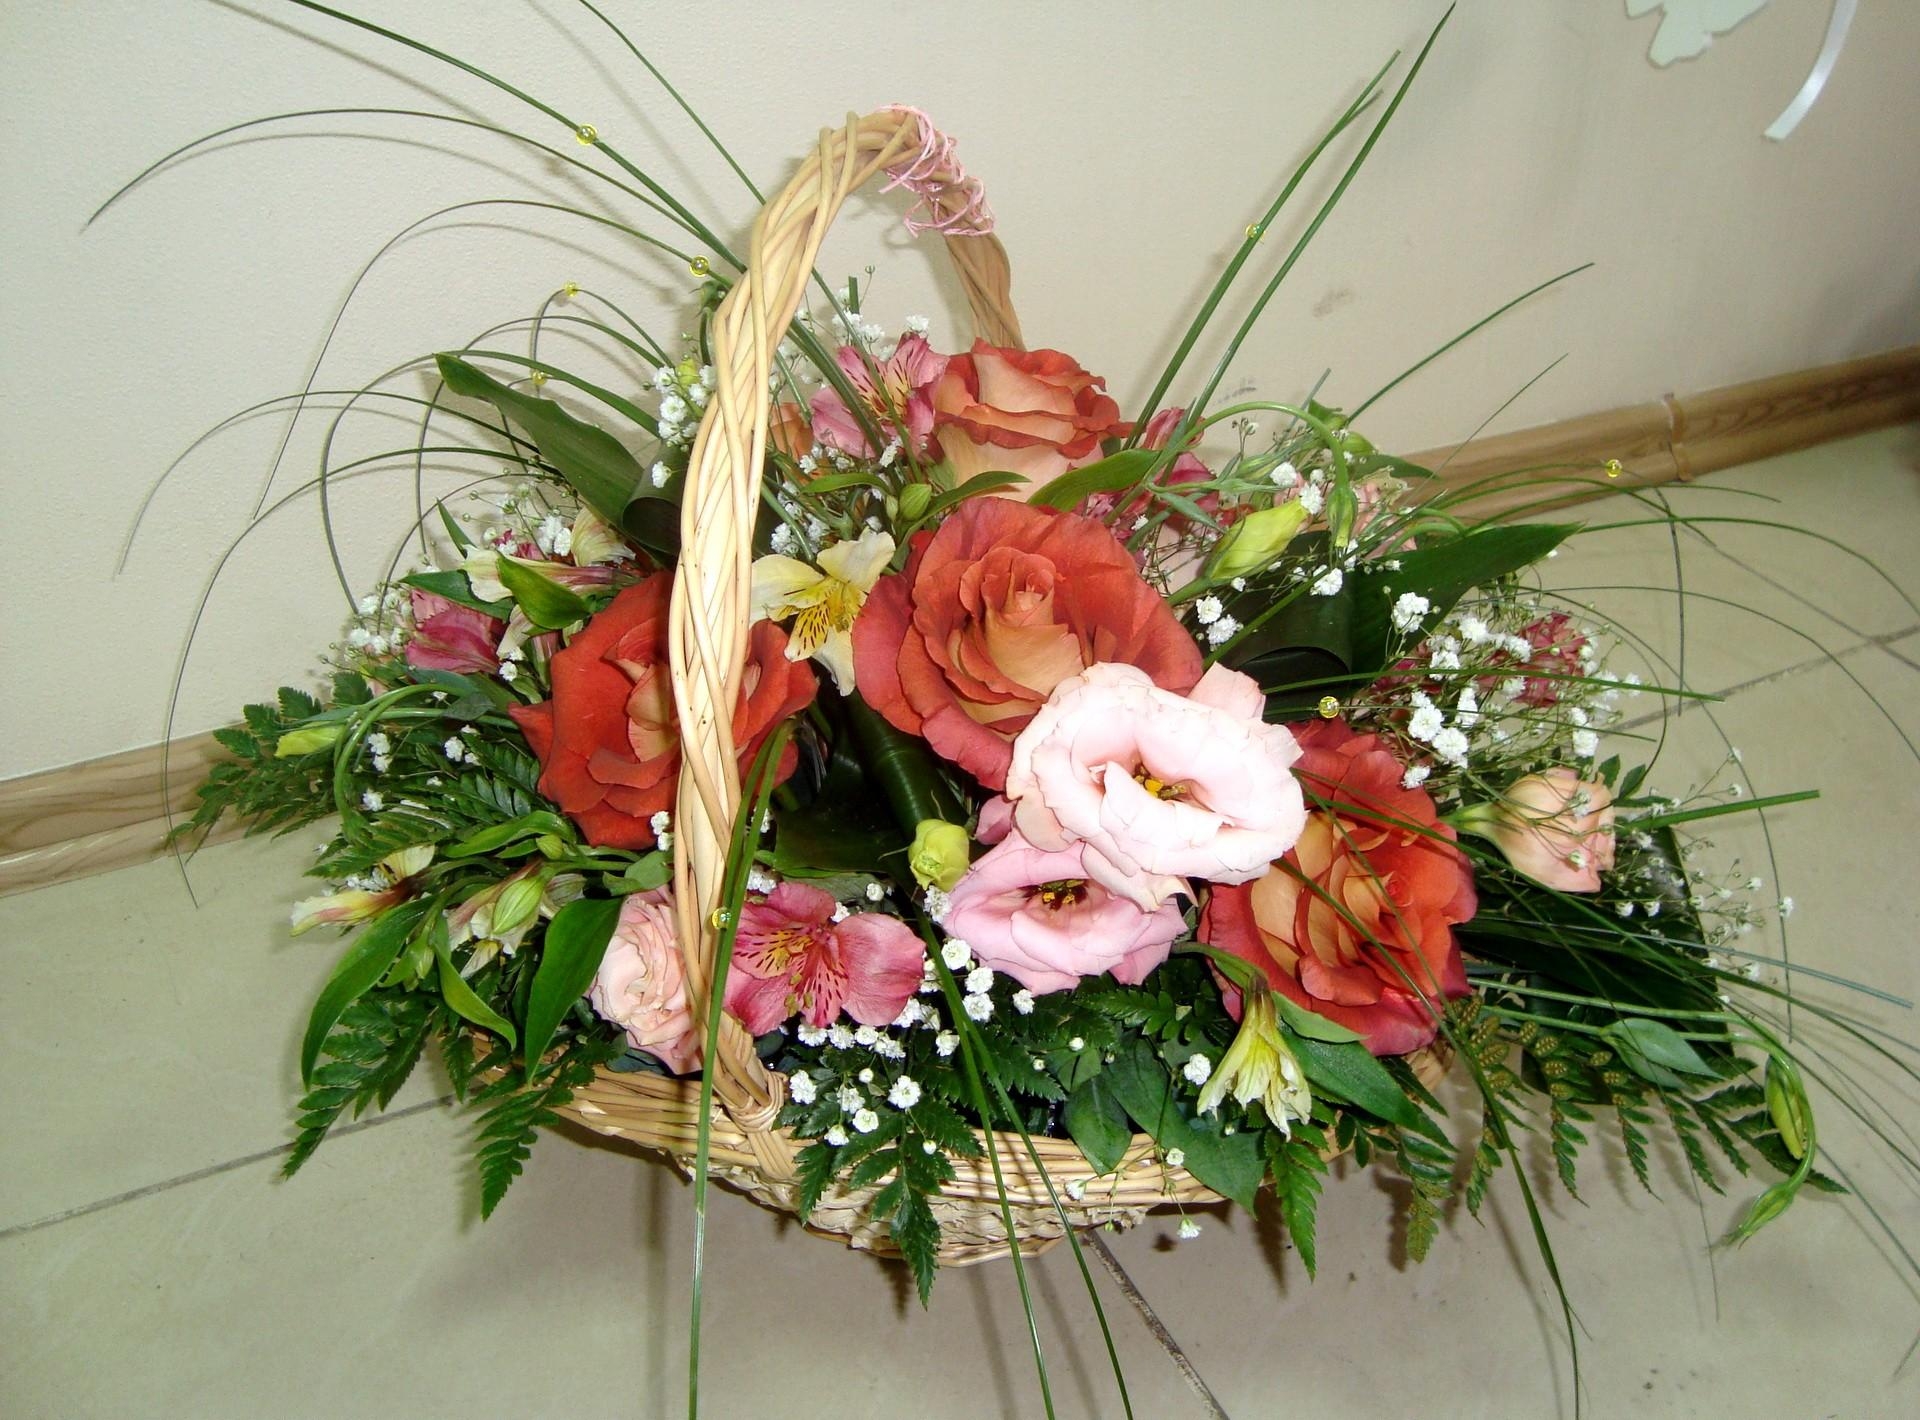 flowers, roses, fern, alstroemeria, gypsophilus, gipsophile, basket, composition, lisianthus russell, lisiantus russell 32K